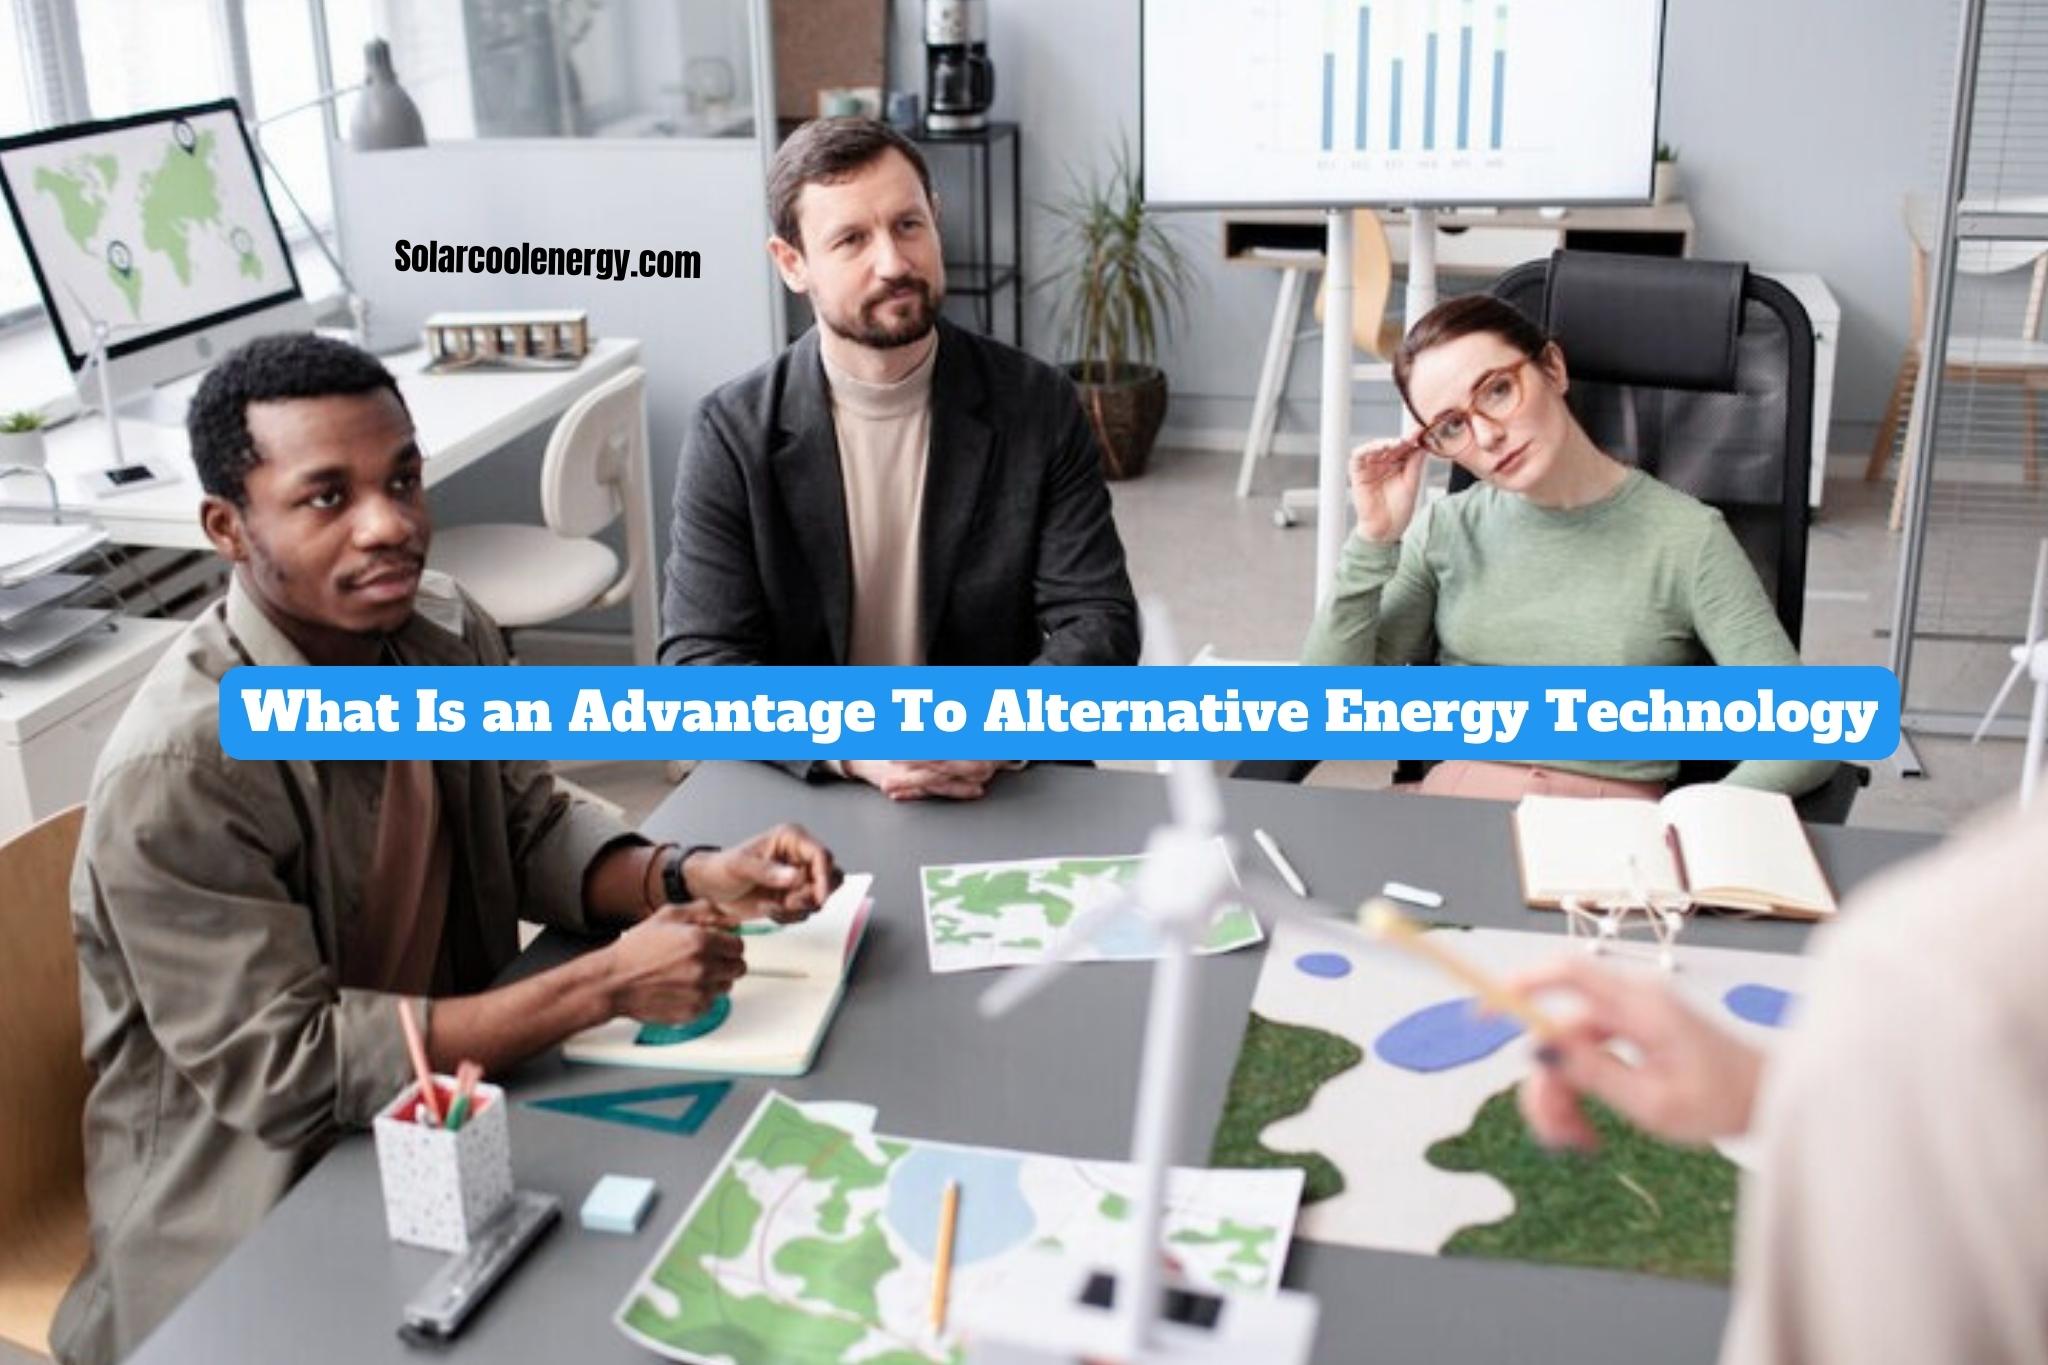 What Is an Advantage To Alternative Energy Technology